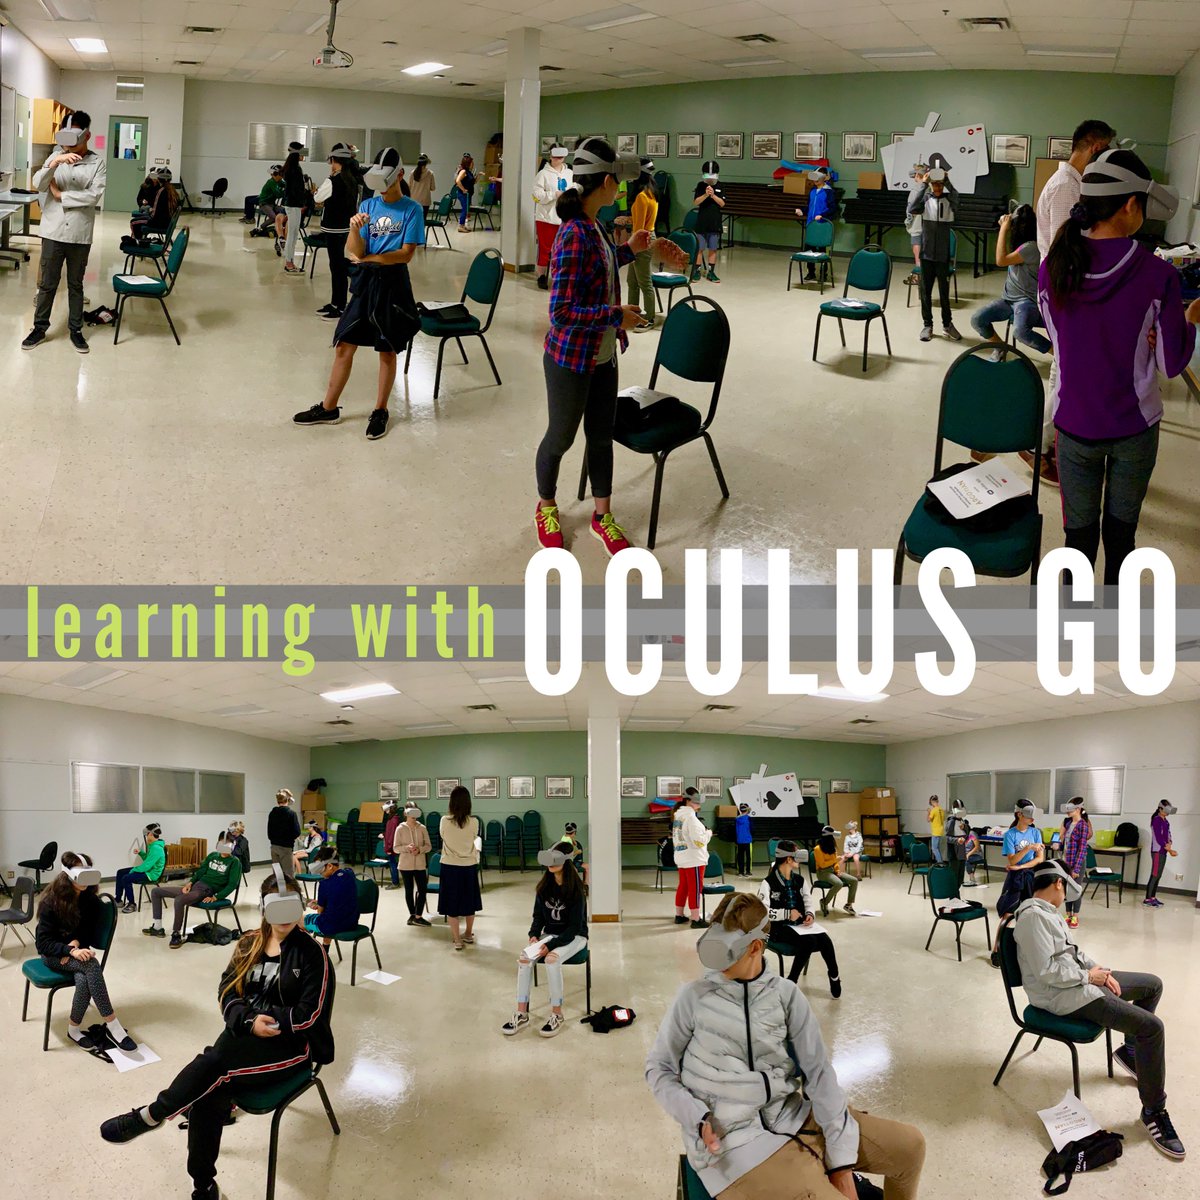 How youth learn VR. Experiencing and evaluating #Argotian, an engaging language learning game with AI characters, adventure, quests, and imaginative education! #Oculus #OculusGo #EdTech #VirtualReality #VRedu #VReducation